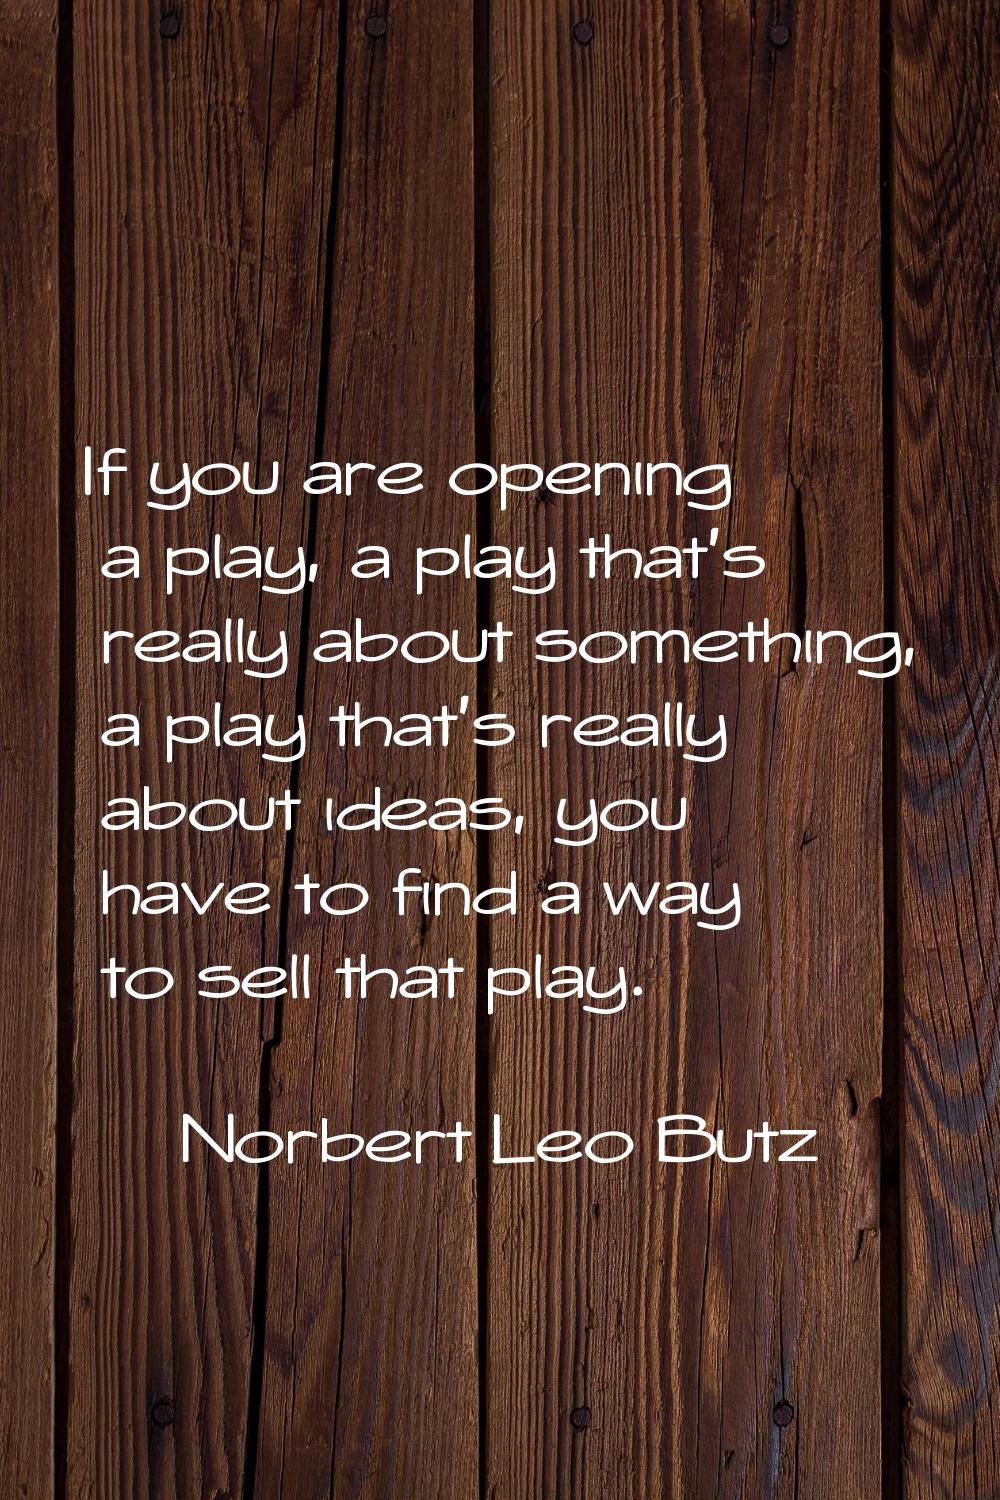 If you are opening a play, a play that's really about something, a play that's really about ideas, 